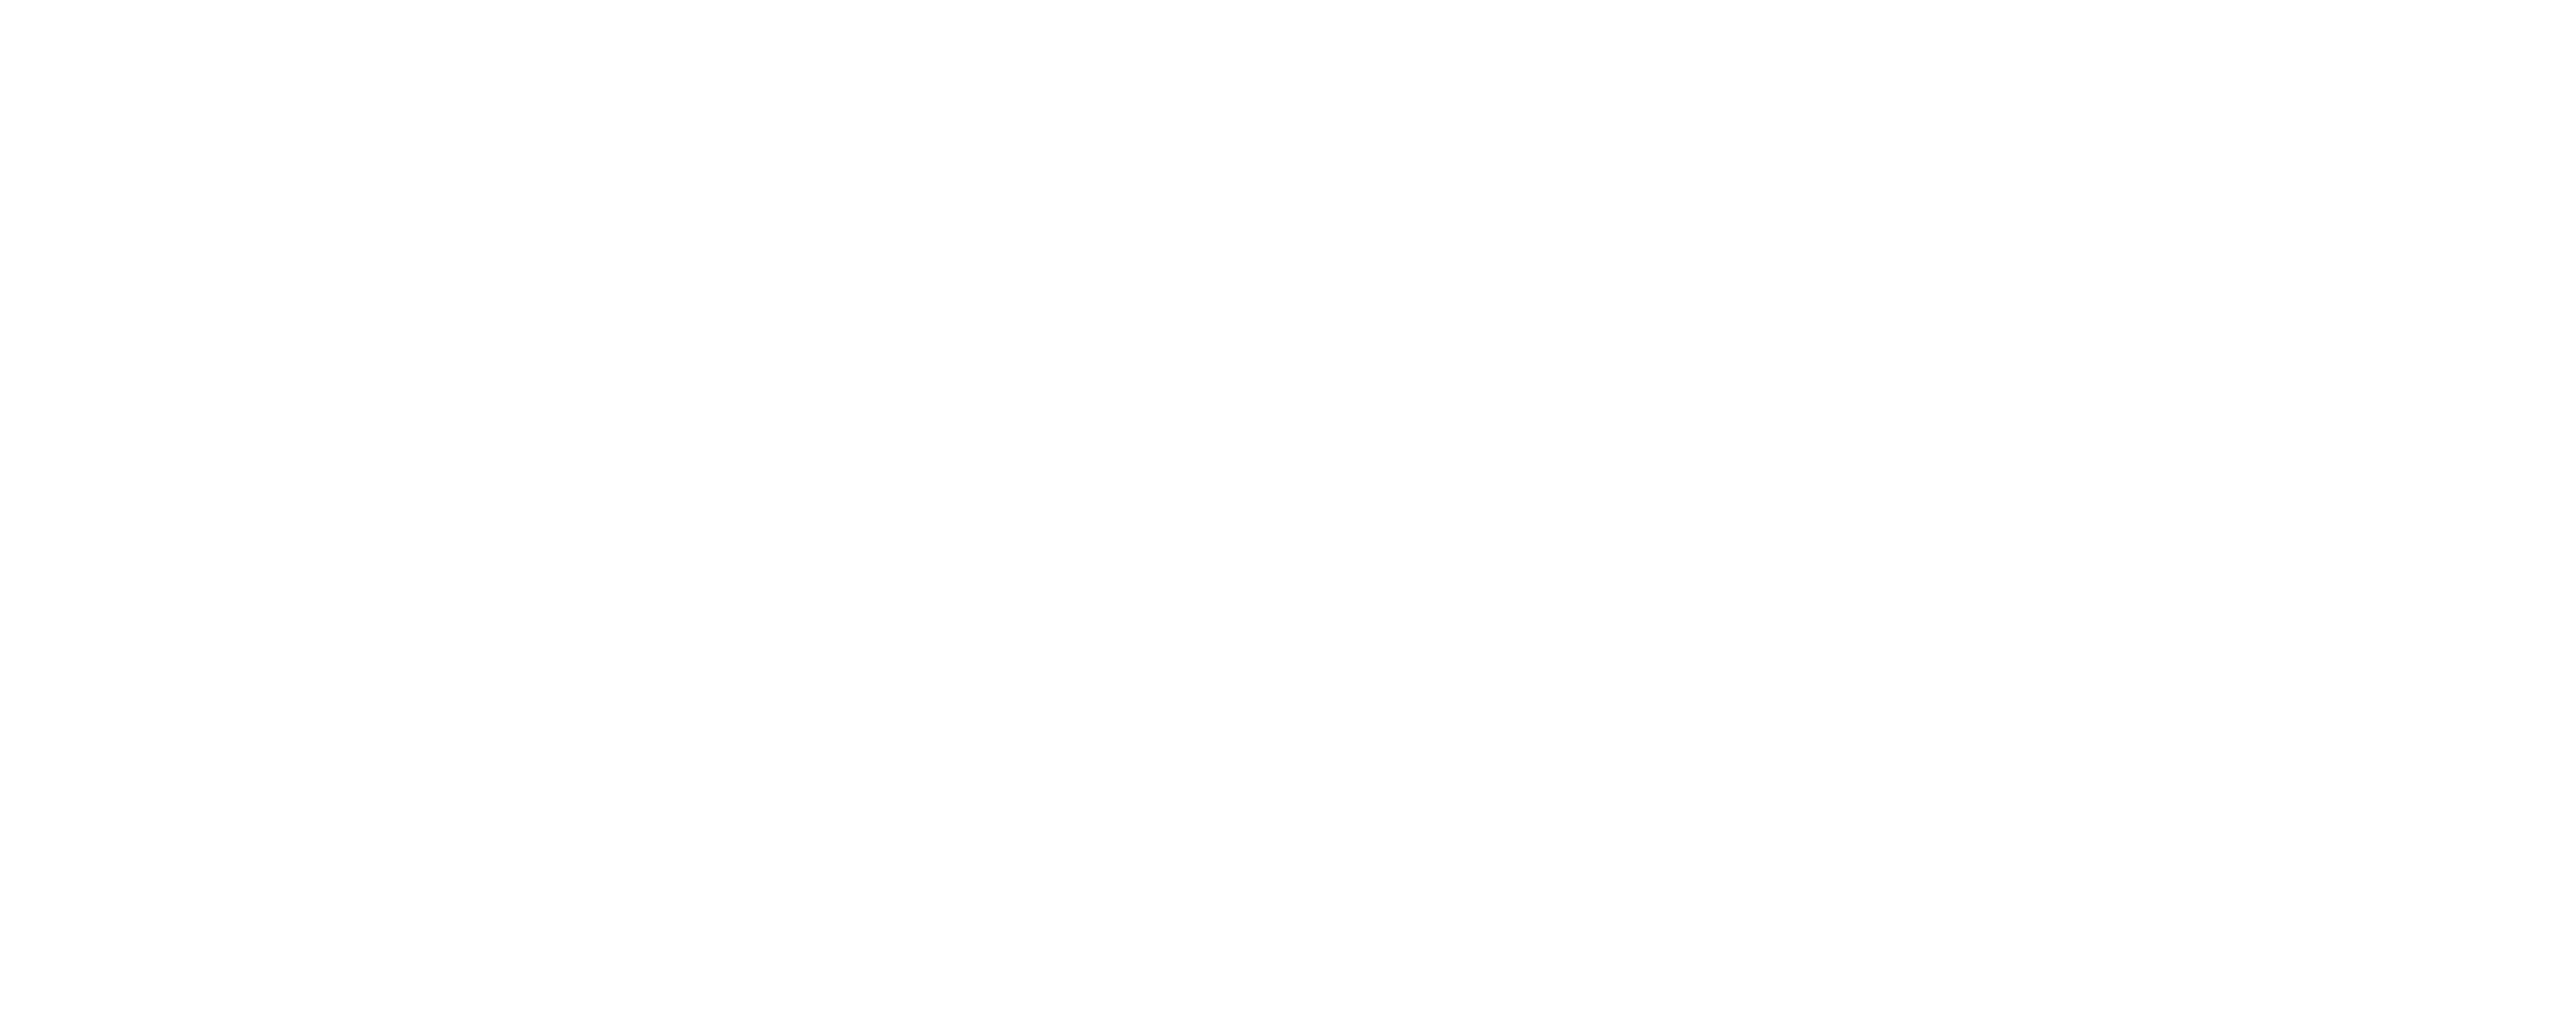 Health Resources in Action